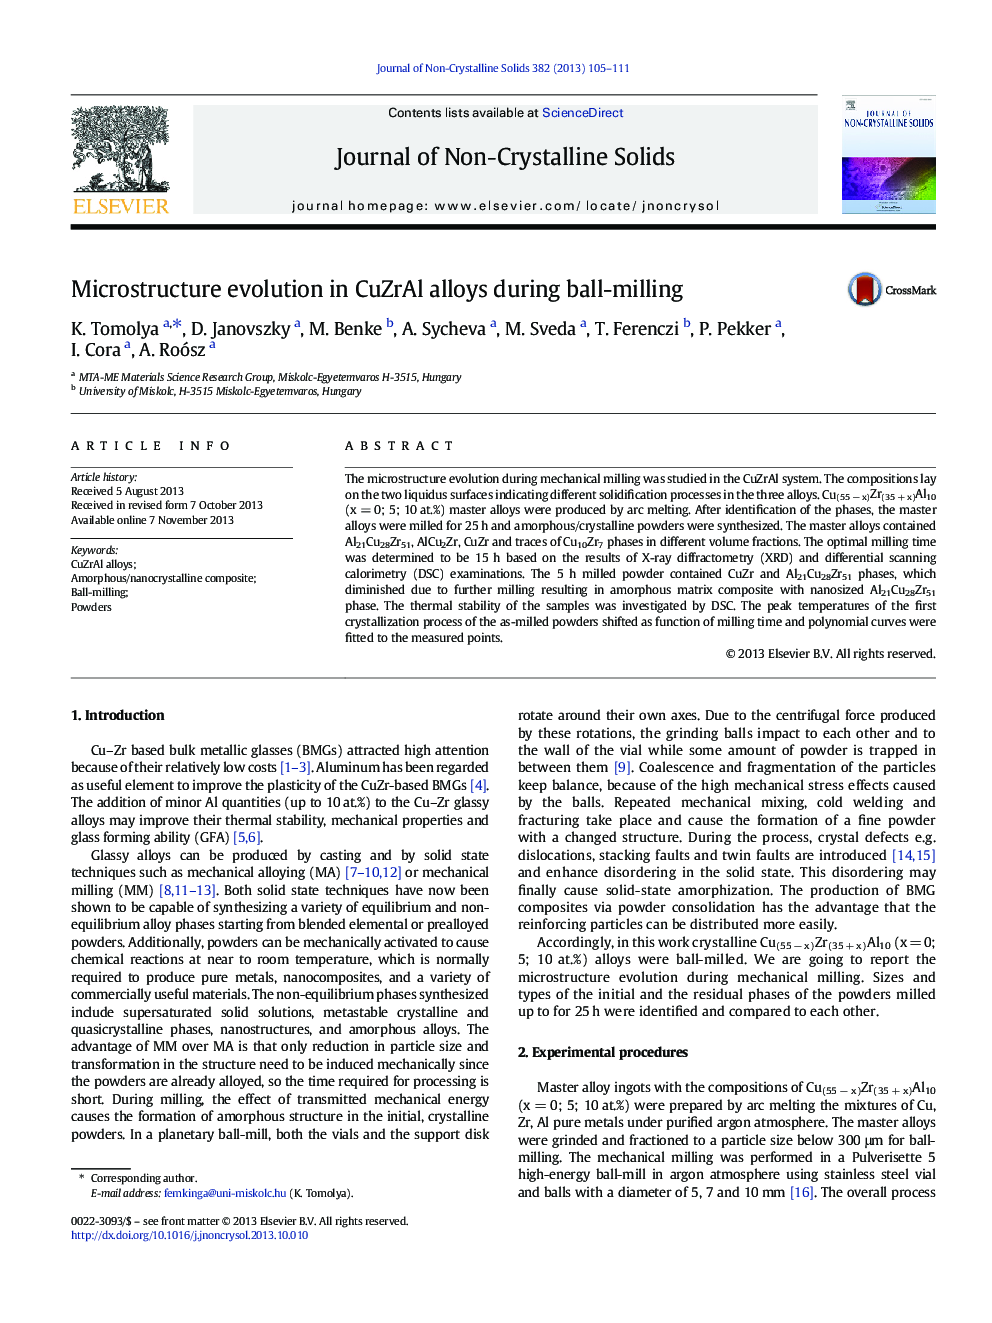 Microstructure evolution in CuZrAl alloys during ball-milling